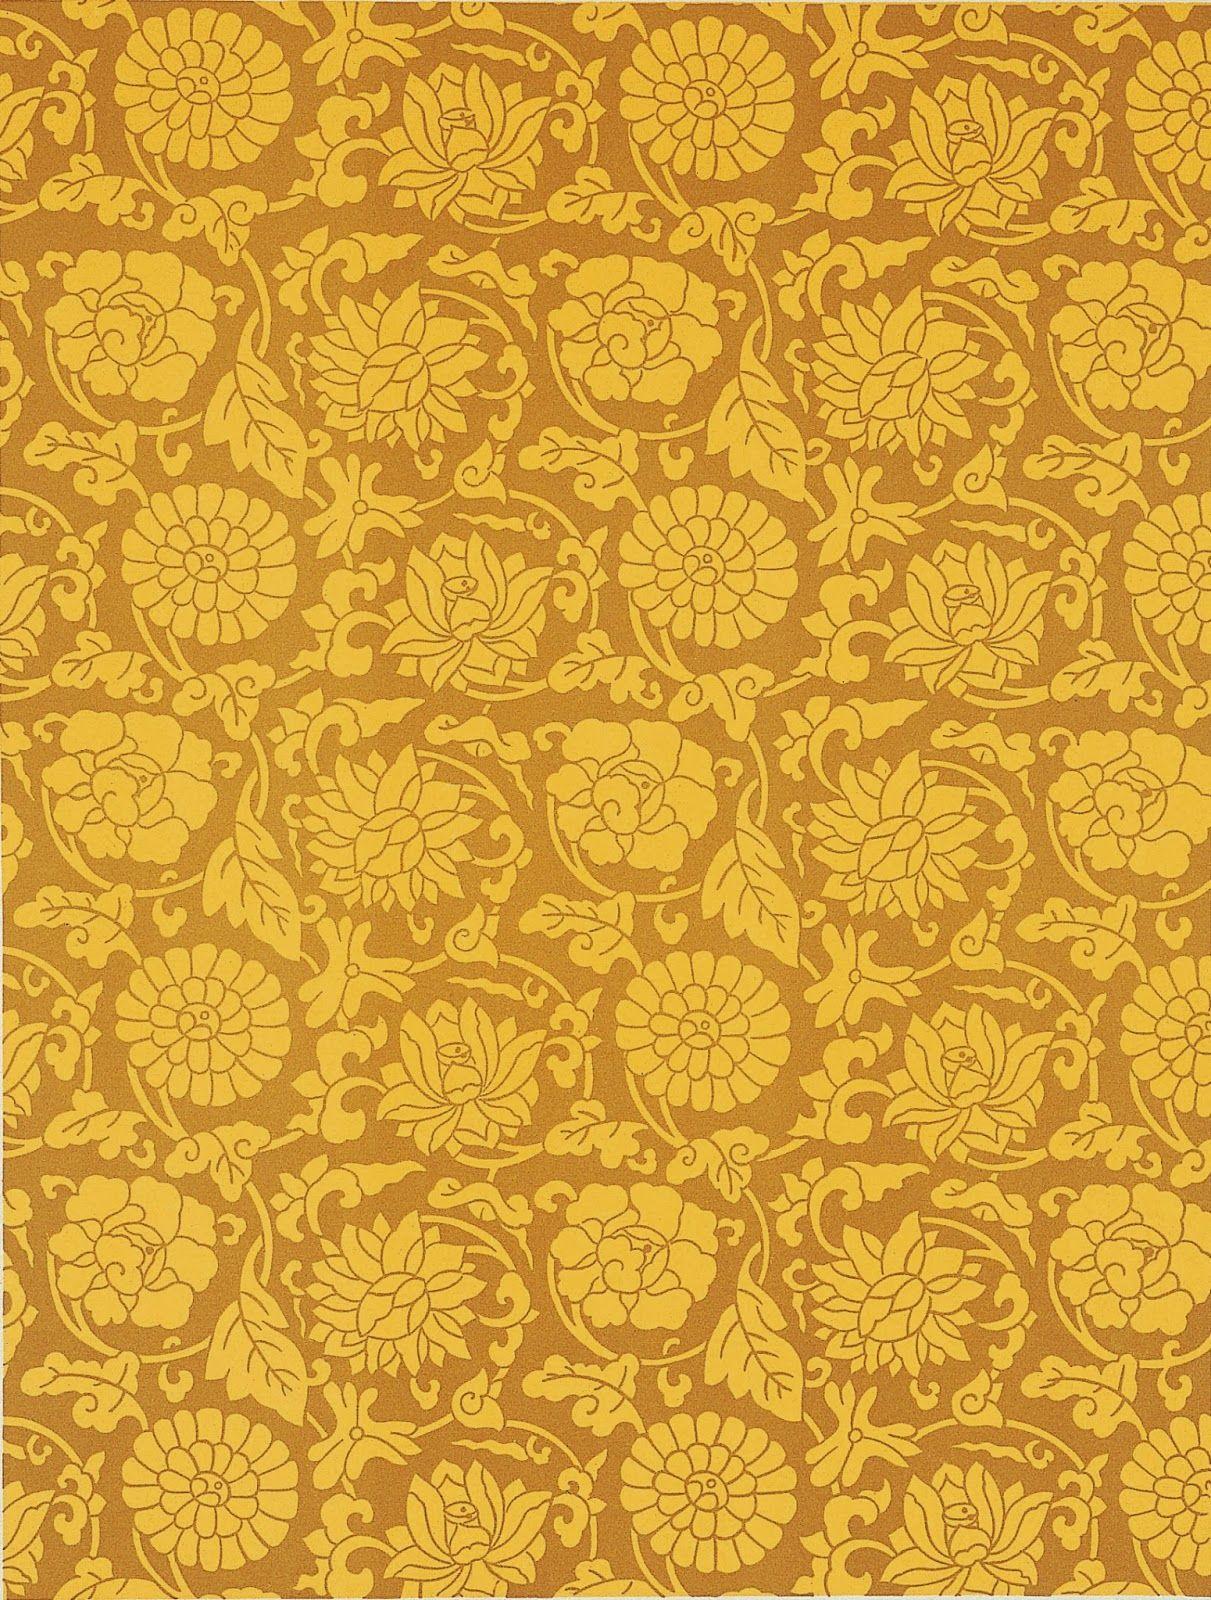 Chinese pattern. textiles paper and patterns: Yellow and Gold